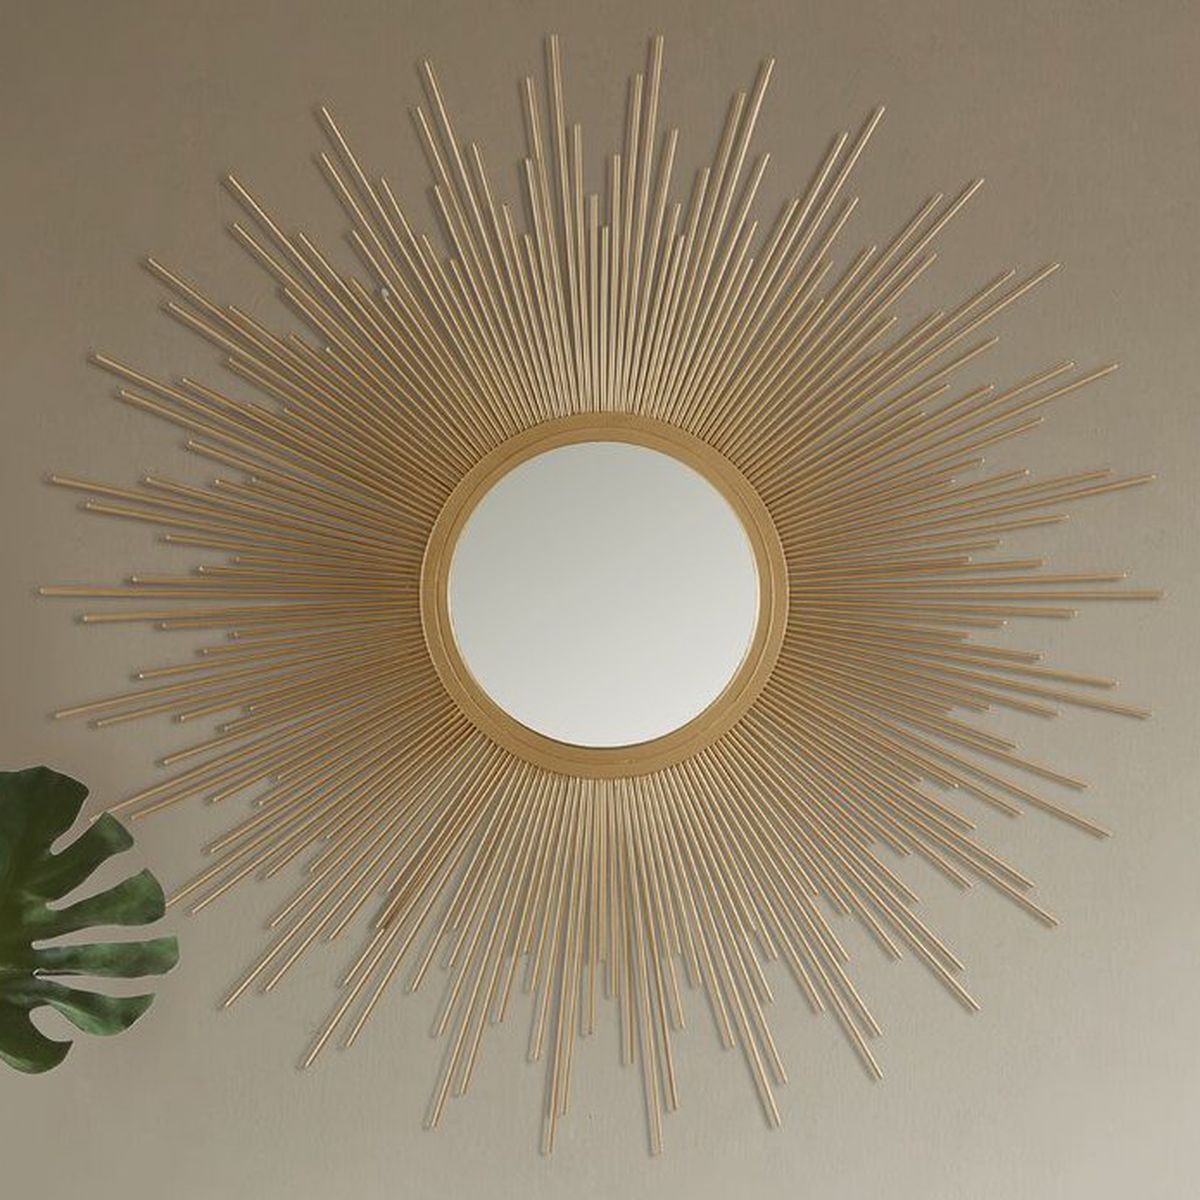 A golden round mirror with stick-shaped pieces radiating from the center like the sun’s rays. 